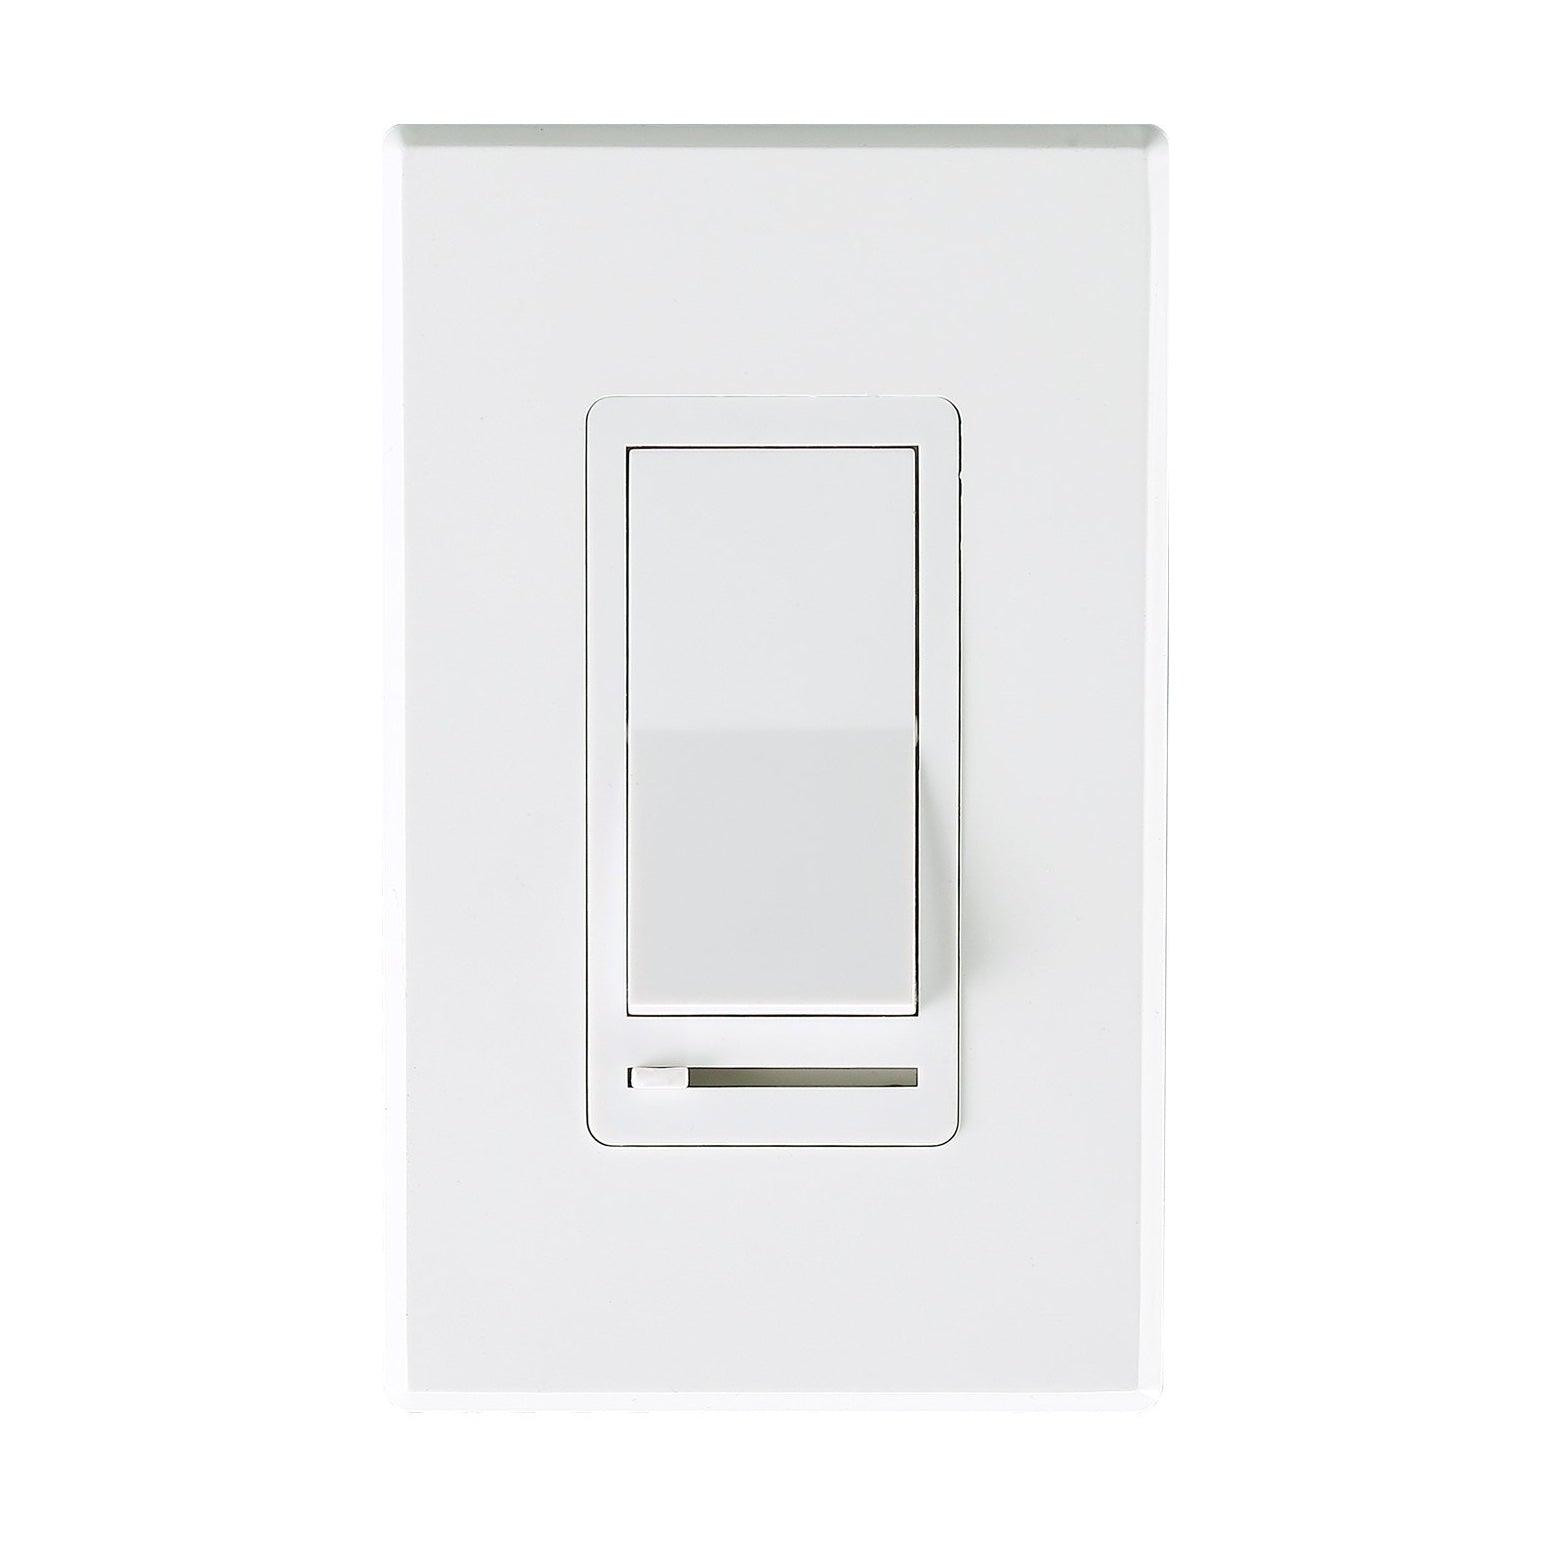 In-Wall LED Dimmer Switch